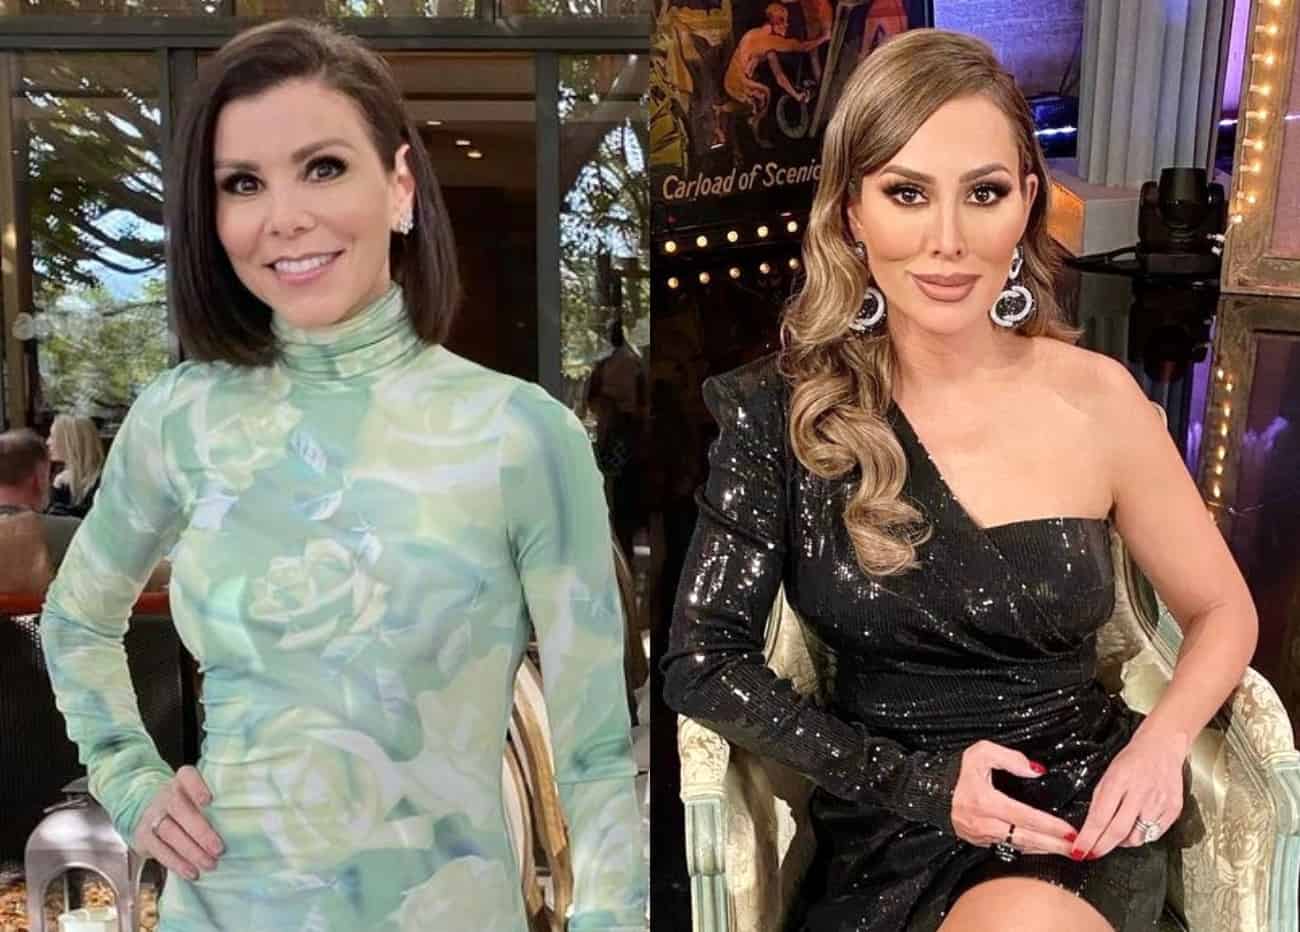 RHOC's Heather Dubrow Slams Kelly Dodd as "Obsessed" and "Pathetic" as Kelly Fires Back by Suggesting Producers "Can't Stand" Her